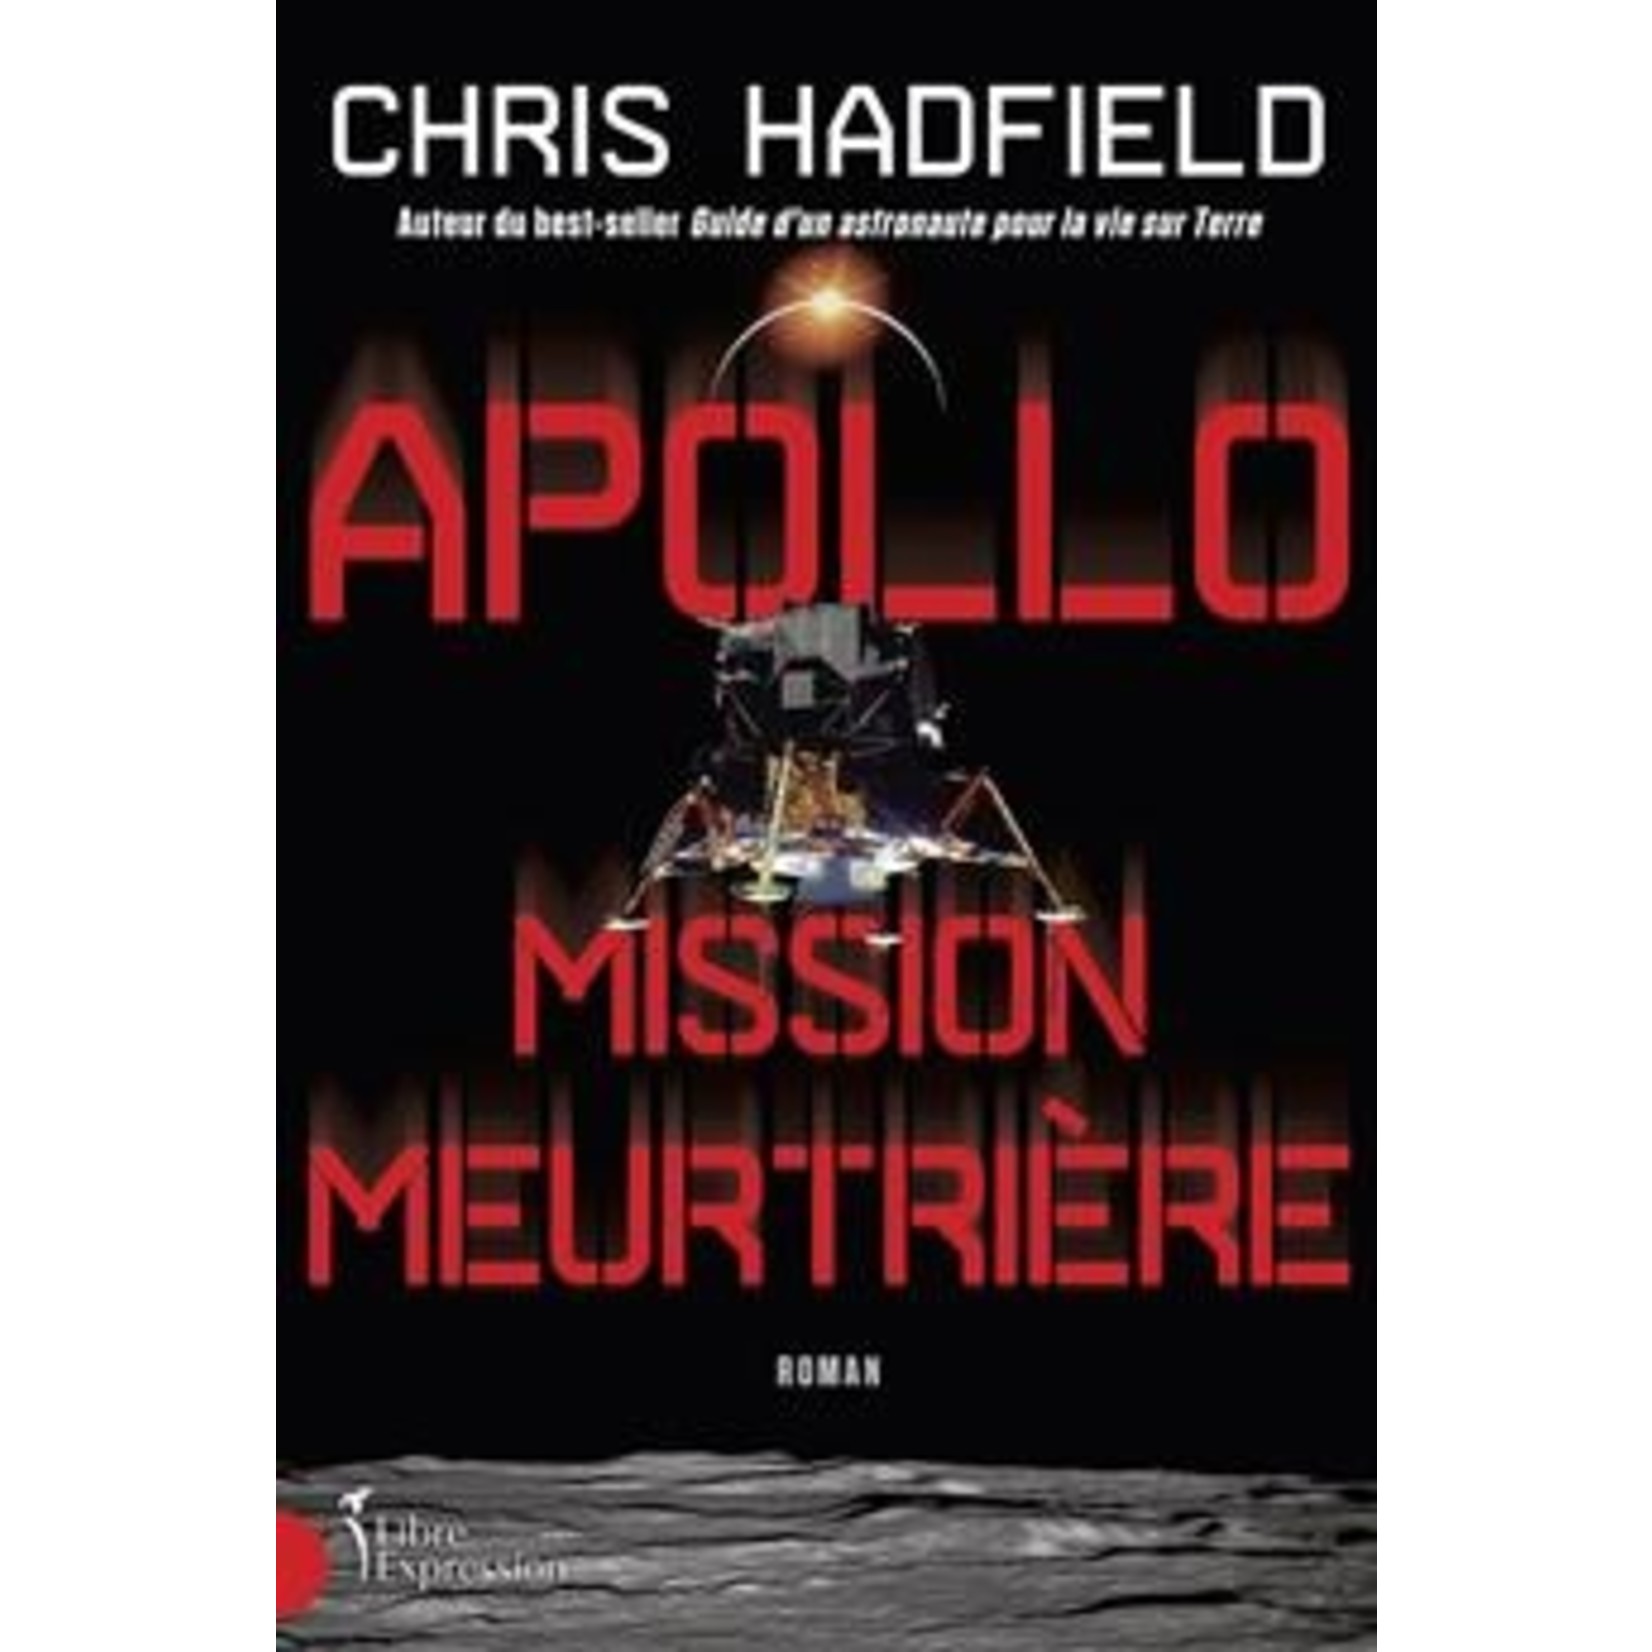 Canadian Space Agency Apollo, mission meurtrière